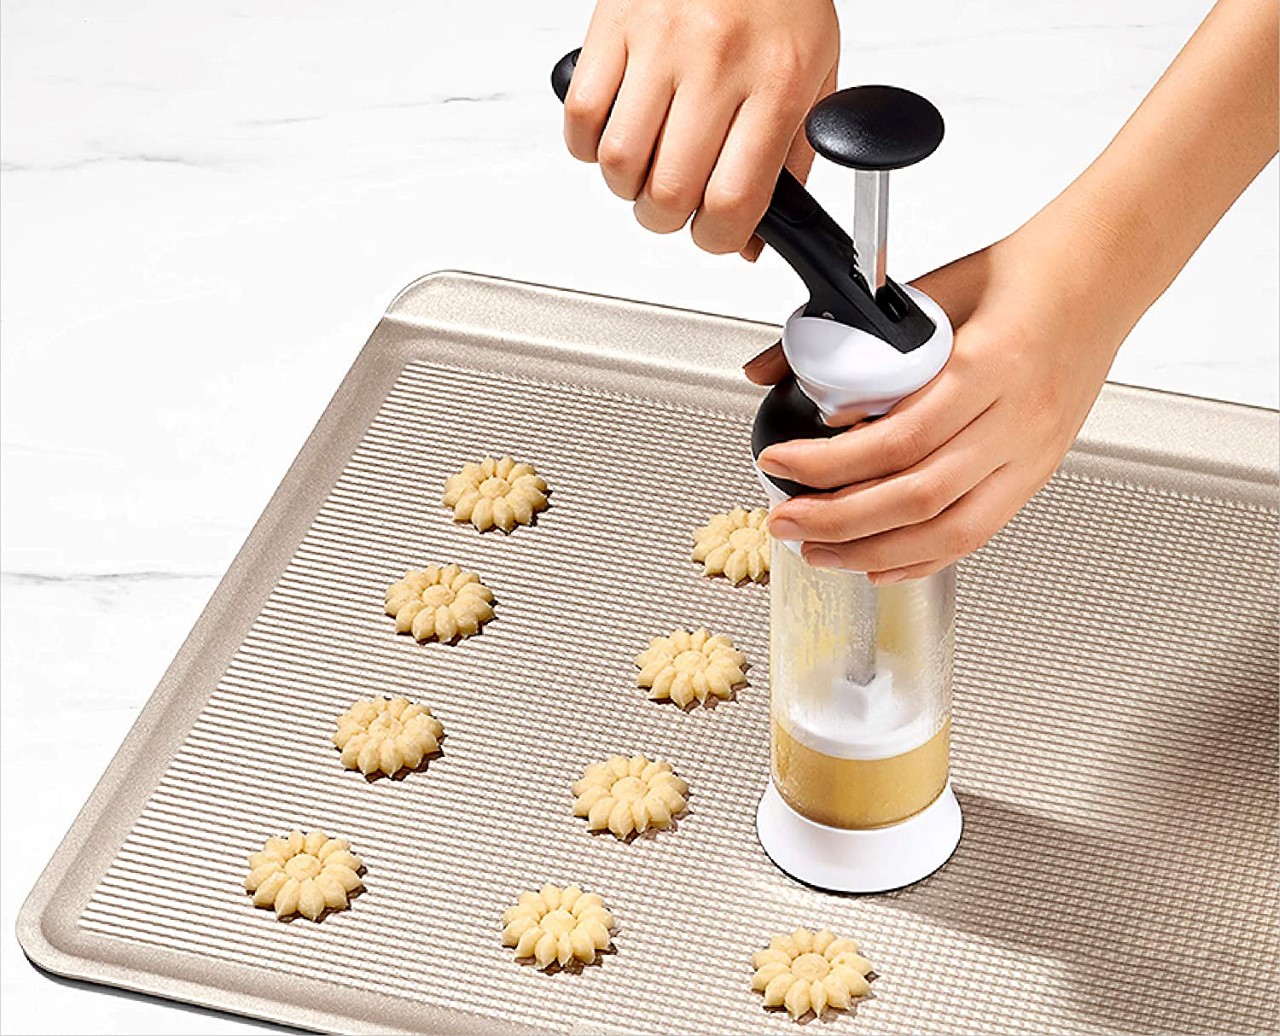 https://www.yankodesign.com/images/design_news/2021/12/the-oxo-cookie-press-lets-you-easily-pump-out-a-whole-bunch-of-perfectly-shaped-holiday-themed-cookies/oxo_cookie_press_2021_5.jpg